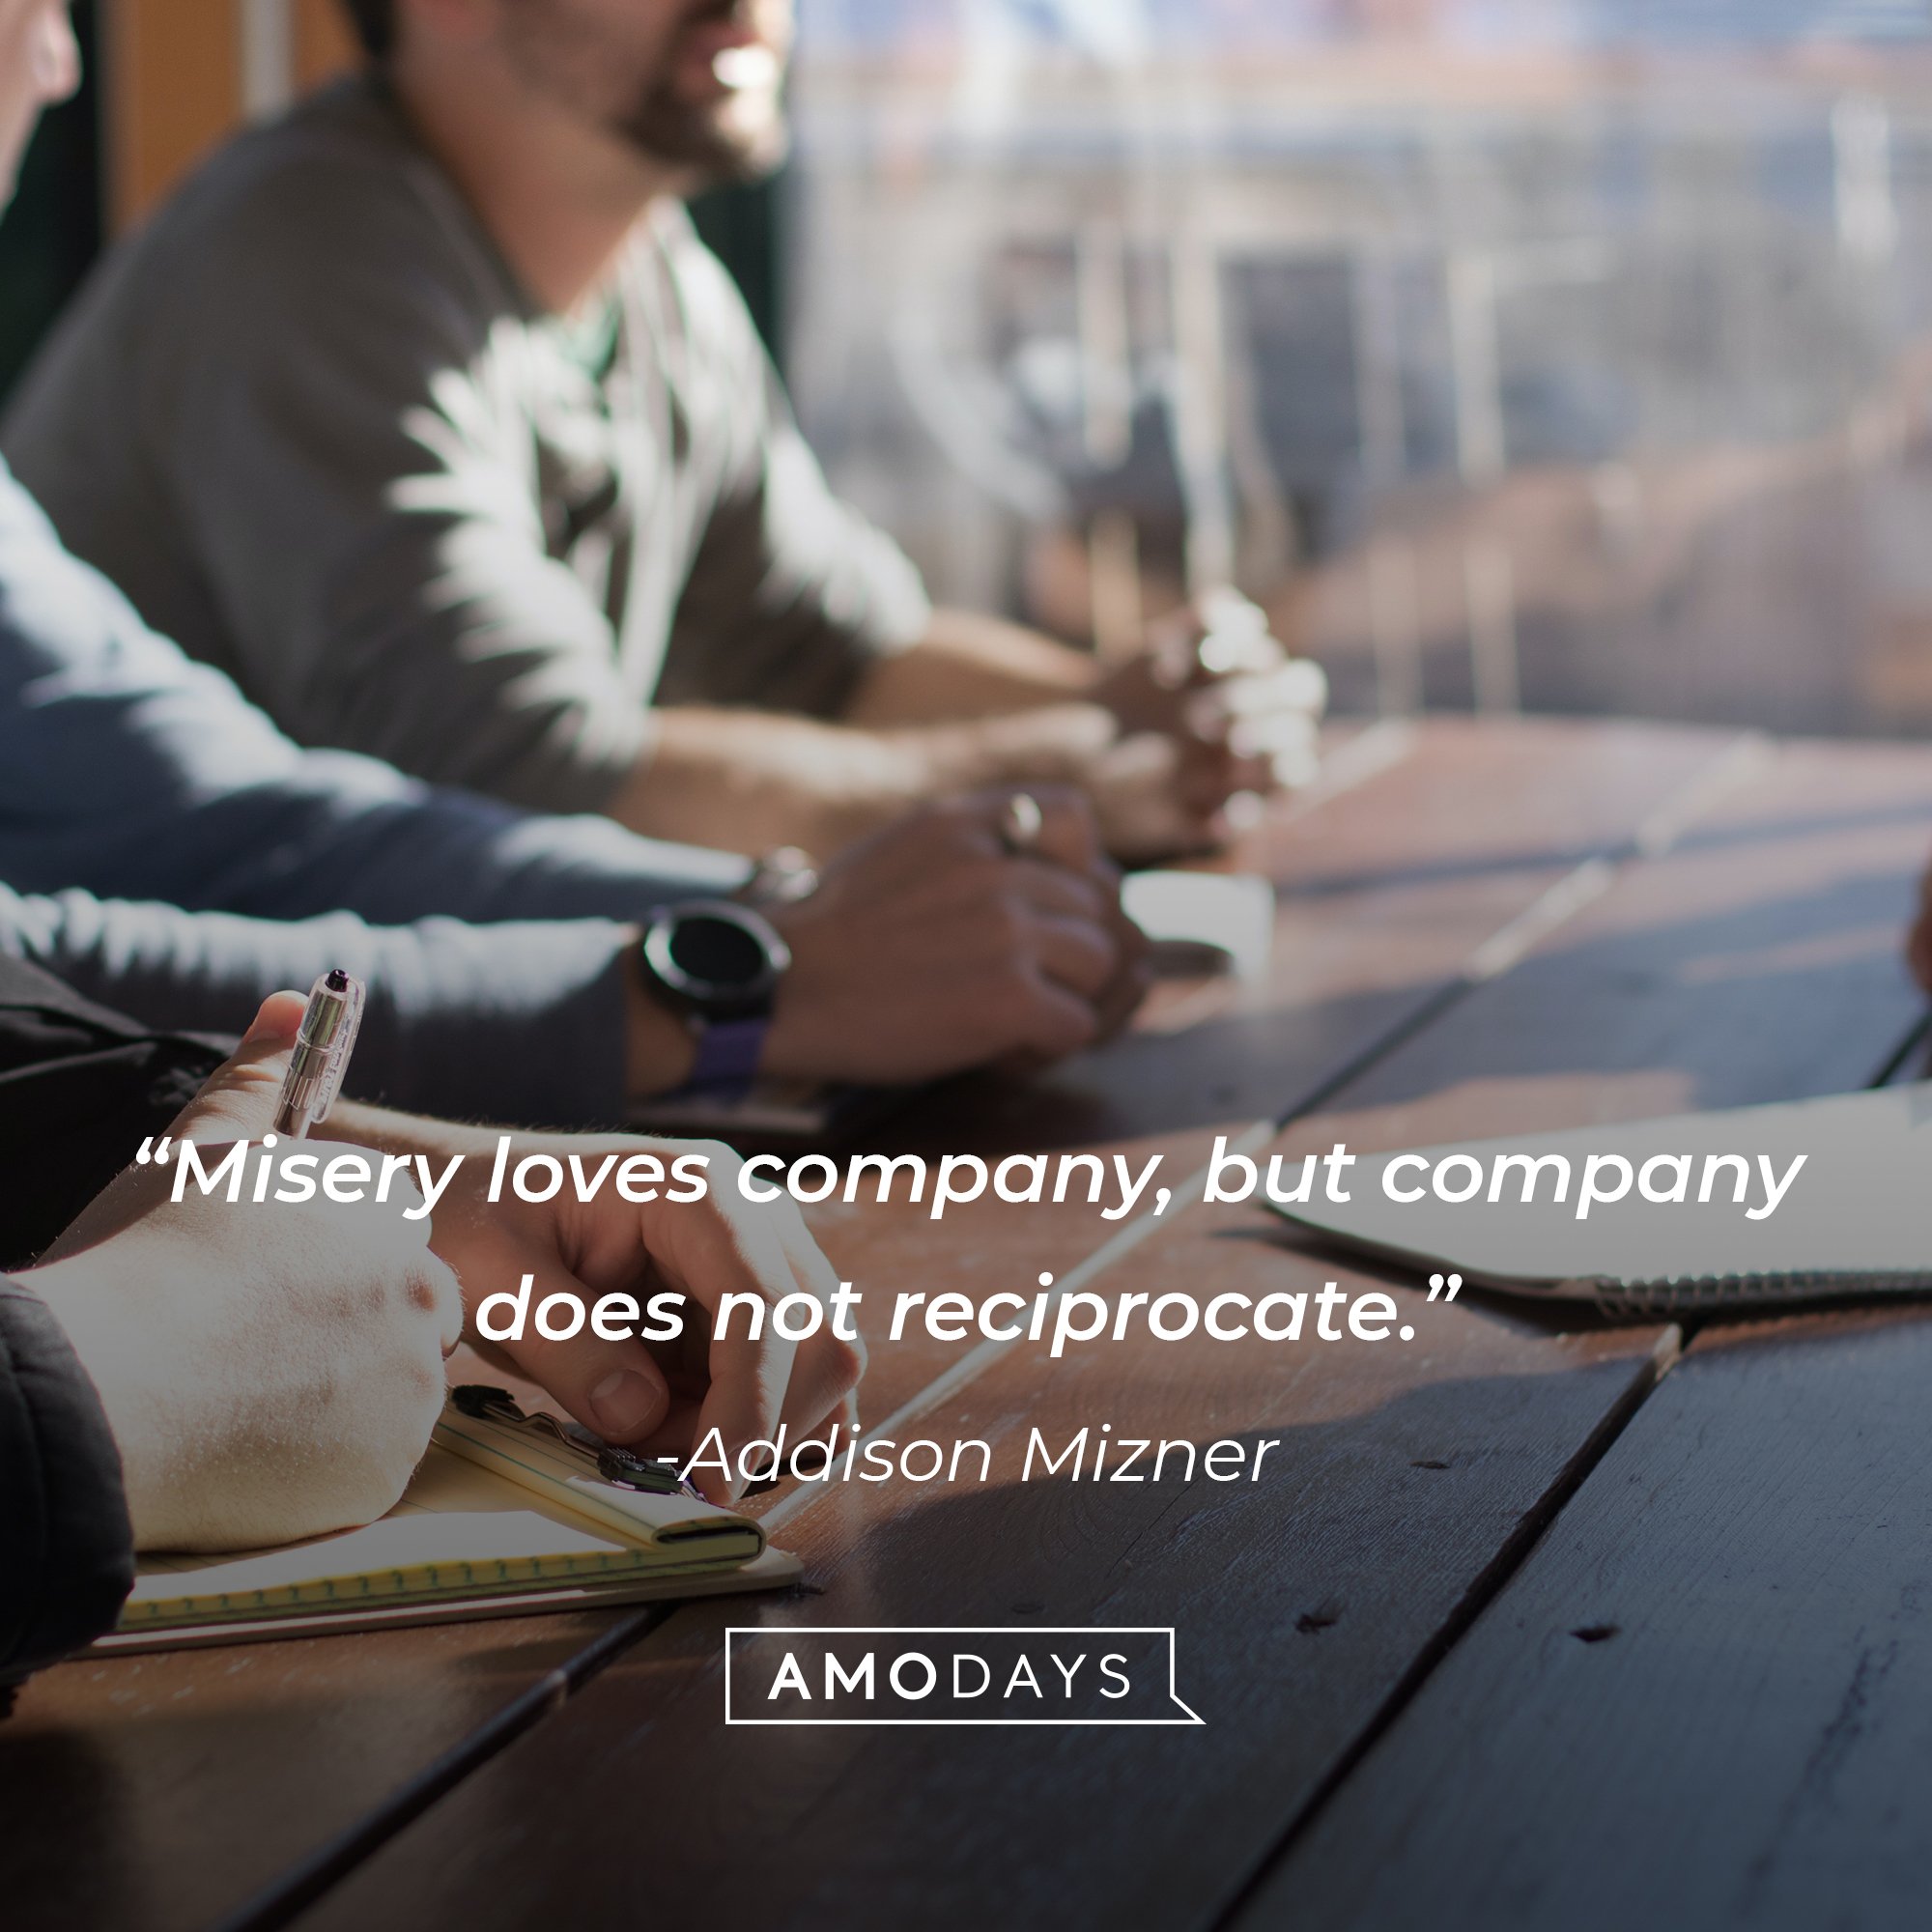 Addison Mizner’s quote: "Misery loves company, but company does not reciprocate." | Image: AmoDays